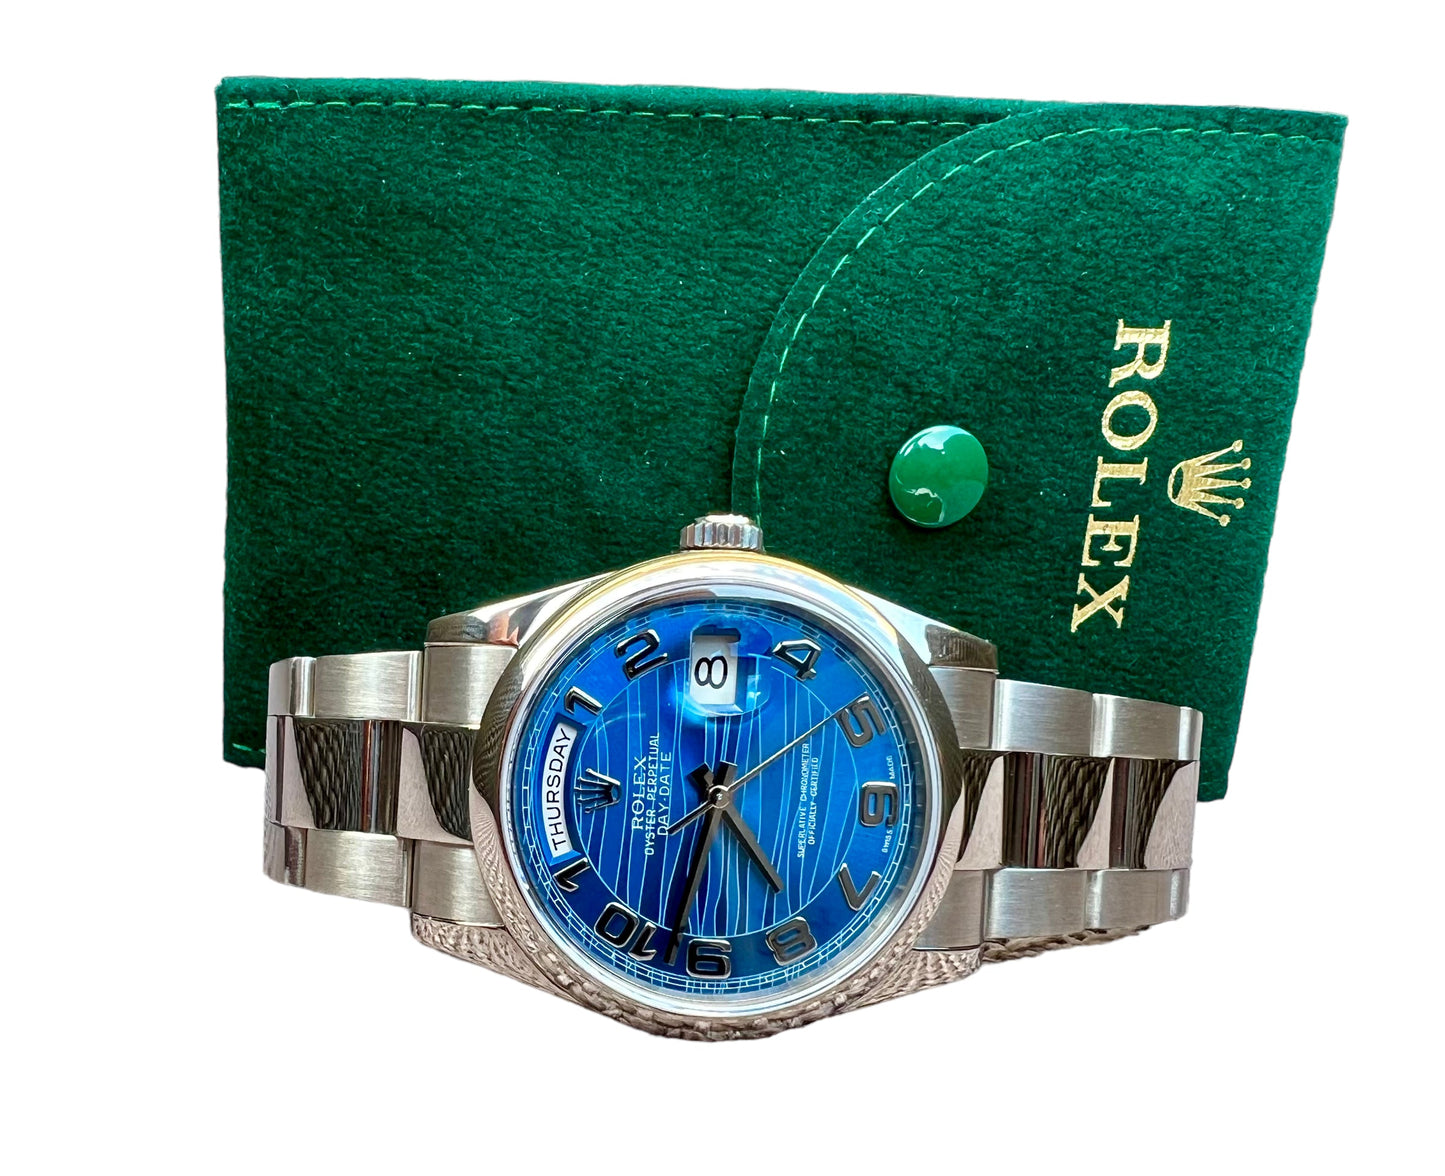 ROLEX Day-Date 18K White Gold, Blue Wave Dial Rare